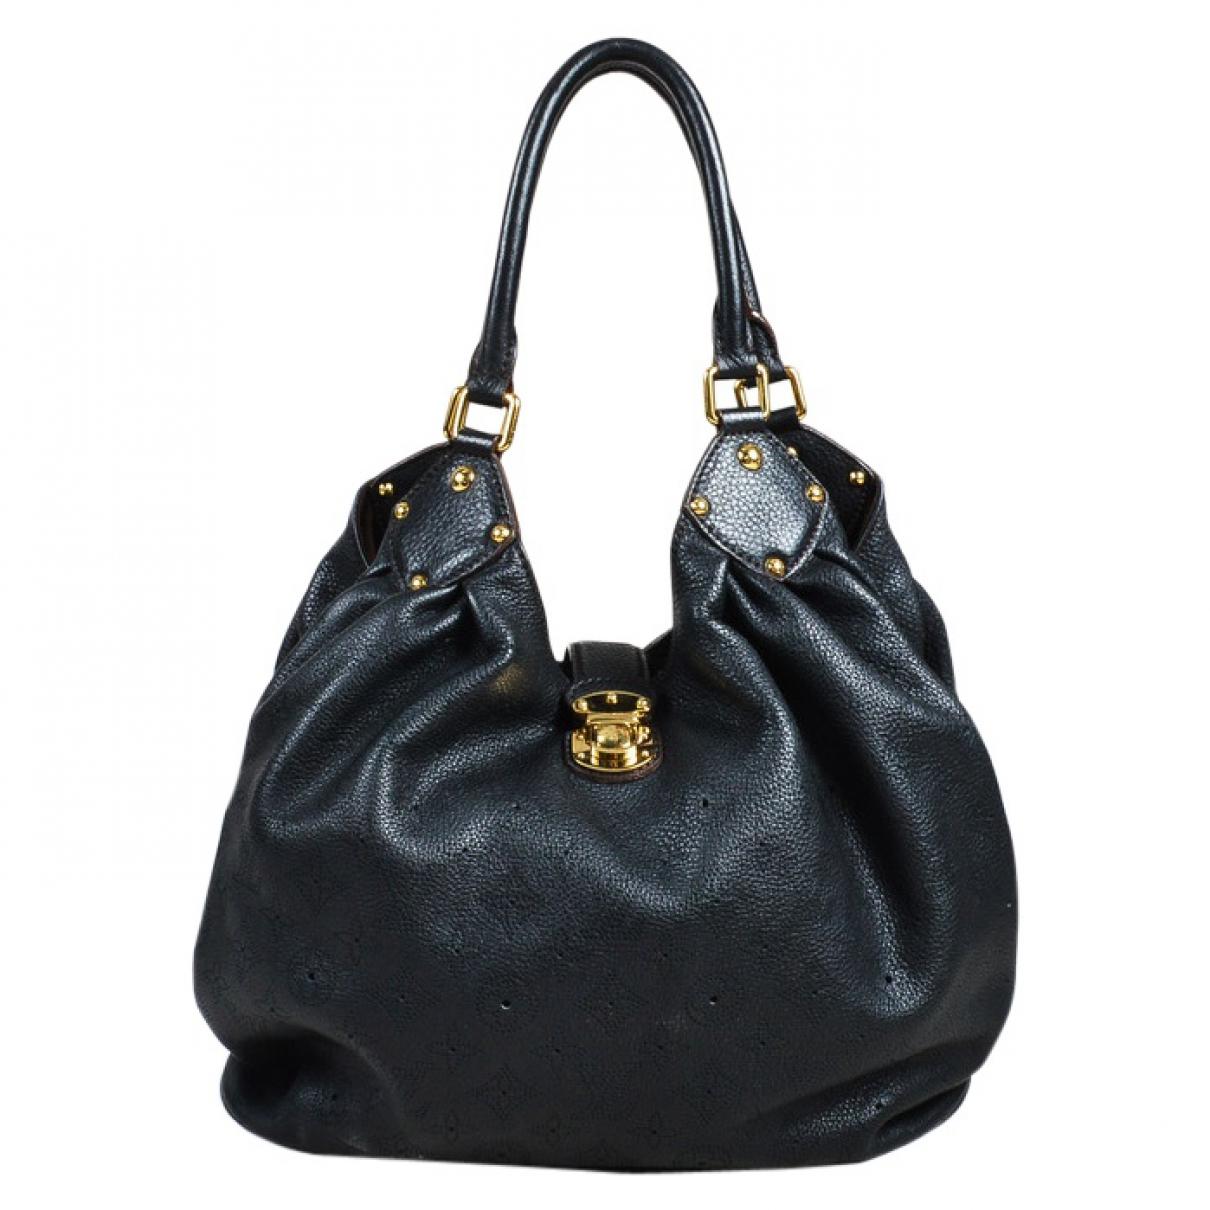 Lyst - Louis Vuitton Pre-owned Mahina Leather Handbag in Black